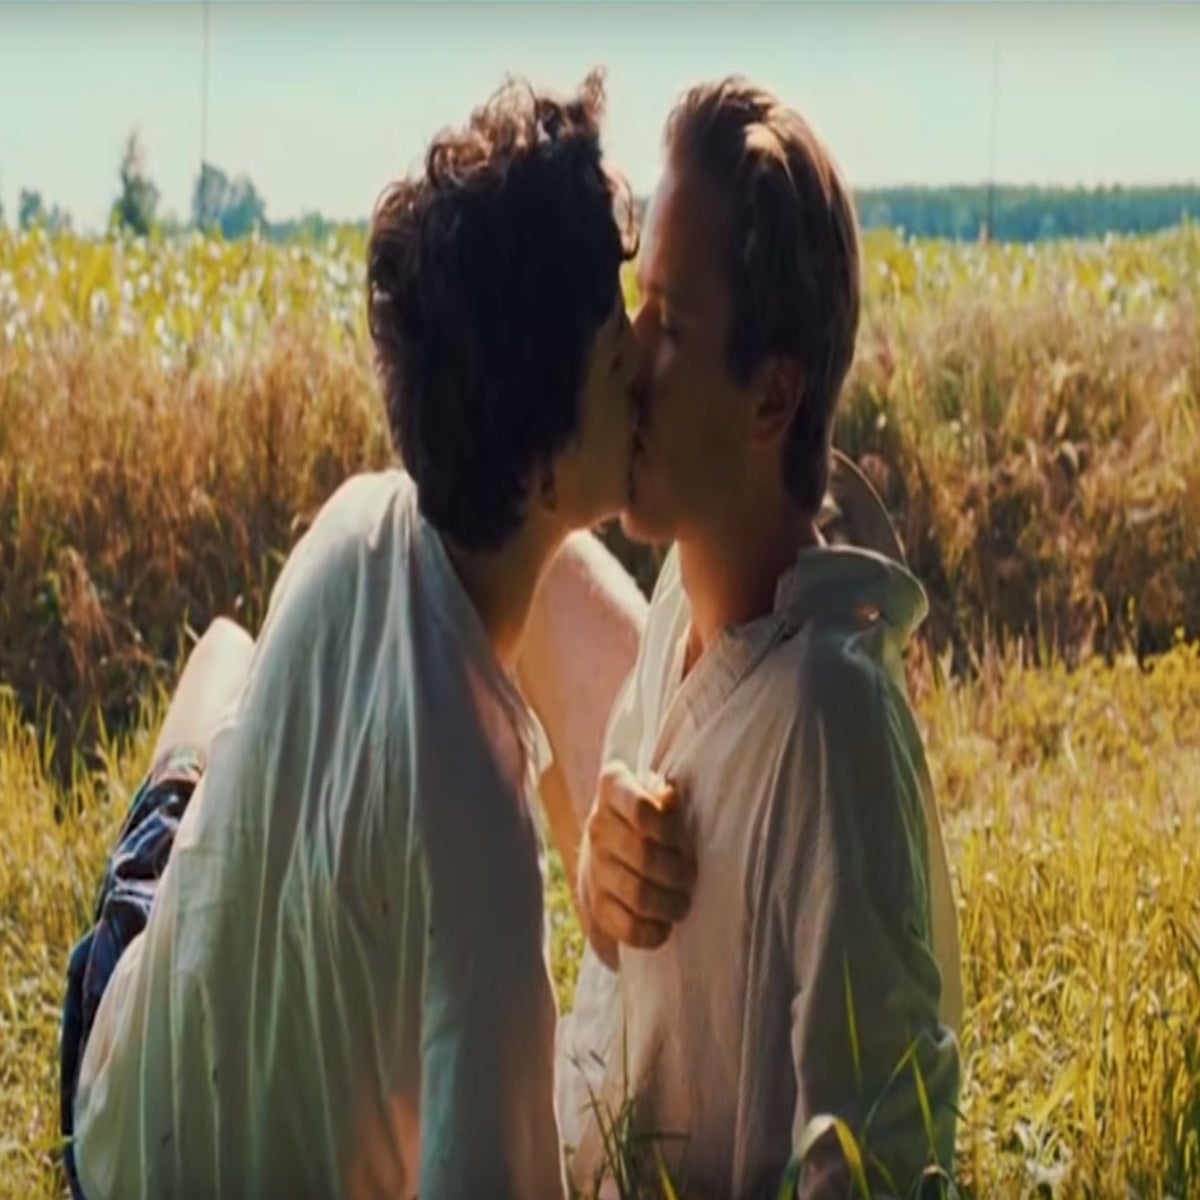 Get the Cut: Armie Hammer and Timothée Chalamet's Call Me by Your